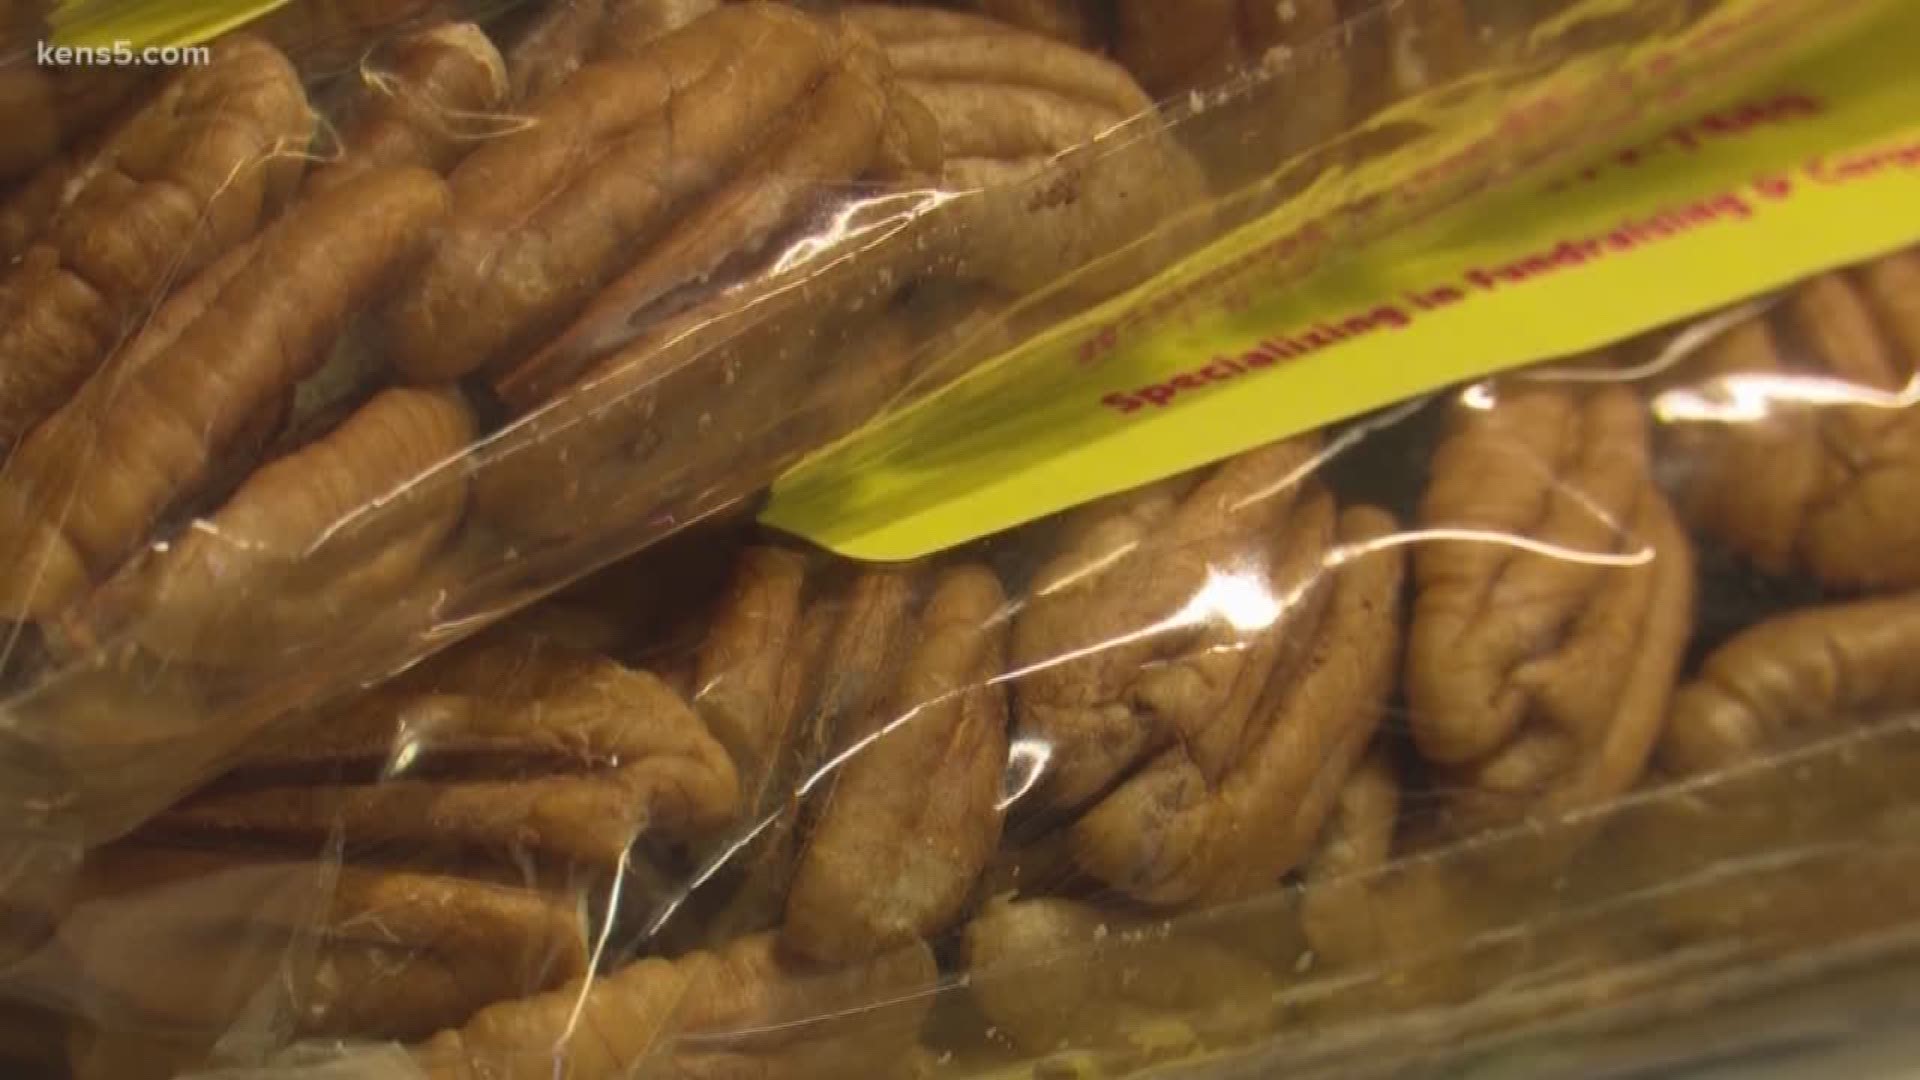 From pecans to chocolate-coated candies, this small family shop in Seguin is finally stocking its inventory after a wet past few months delayed pecan harvest in the area.